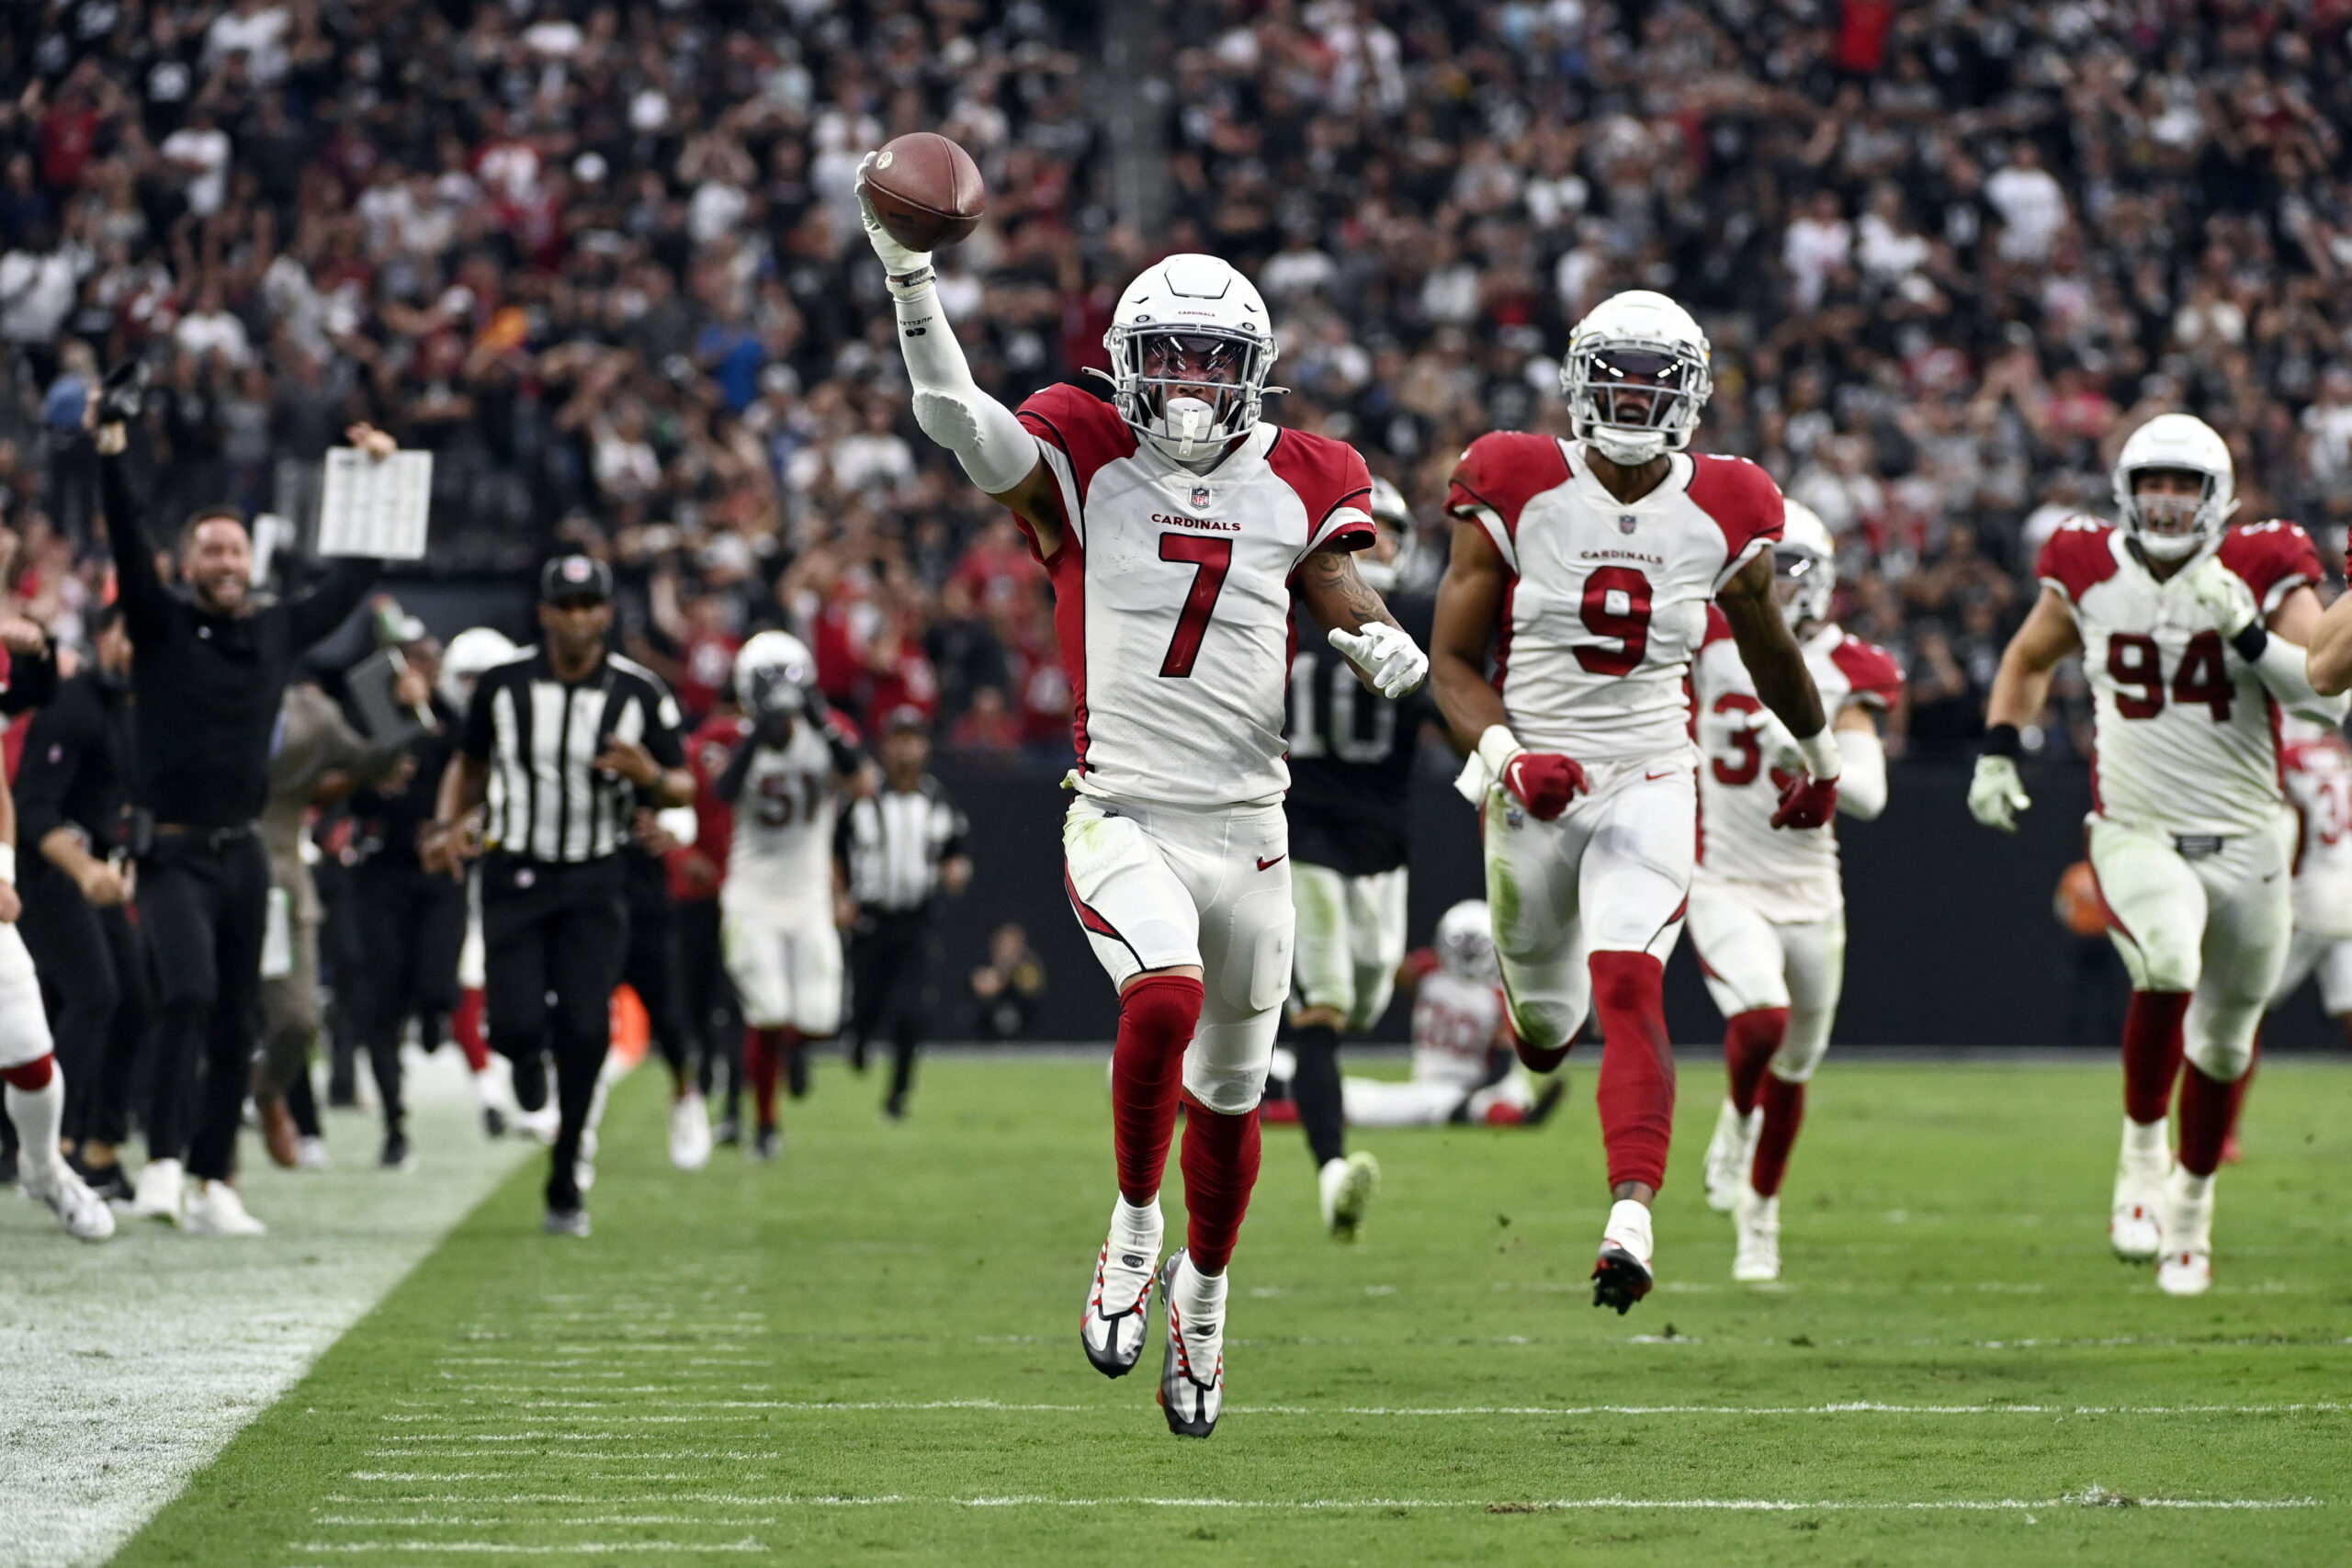 Cardinals complete miraculous come-from-behind win over Raiders in OT